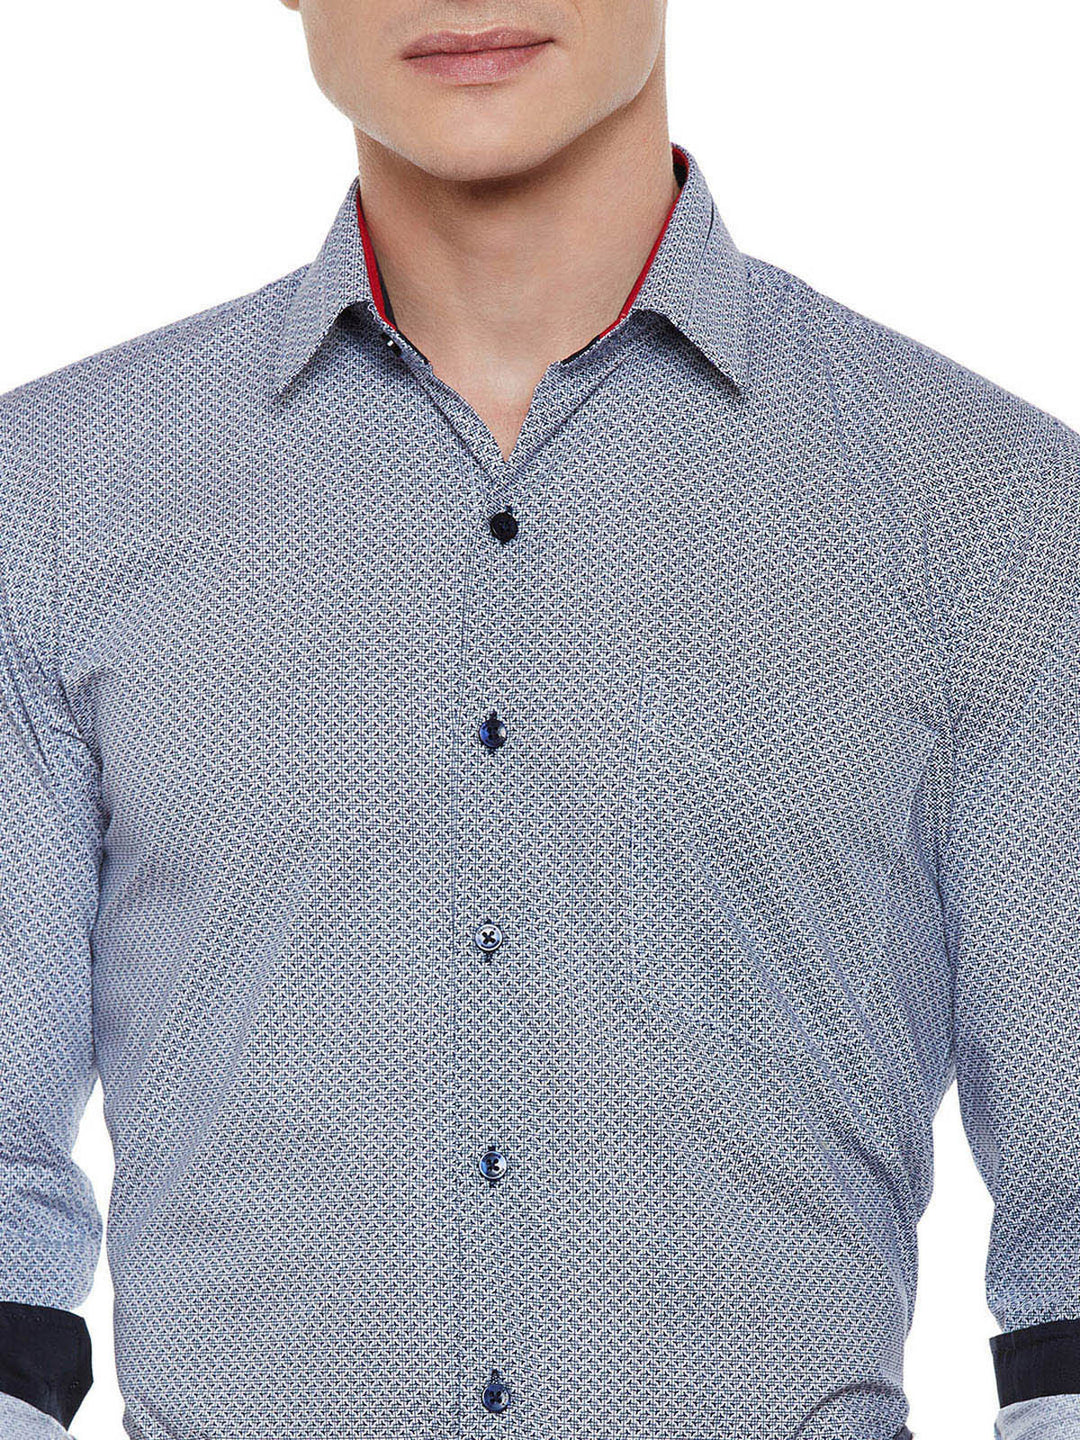 Men White and Navy Printed Pure Cotton Slim Fit Formal Shirt